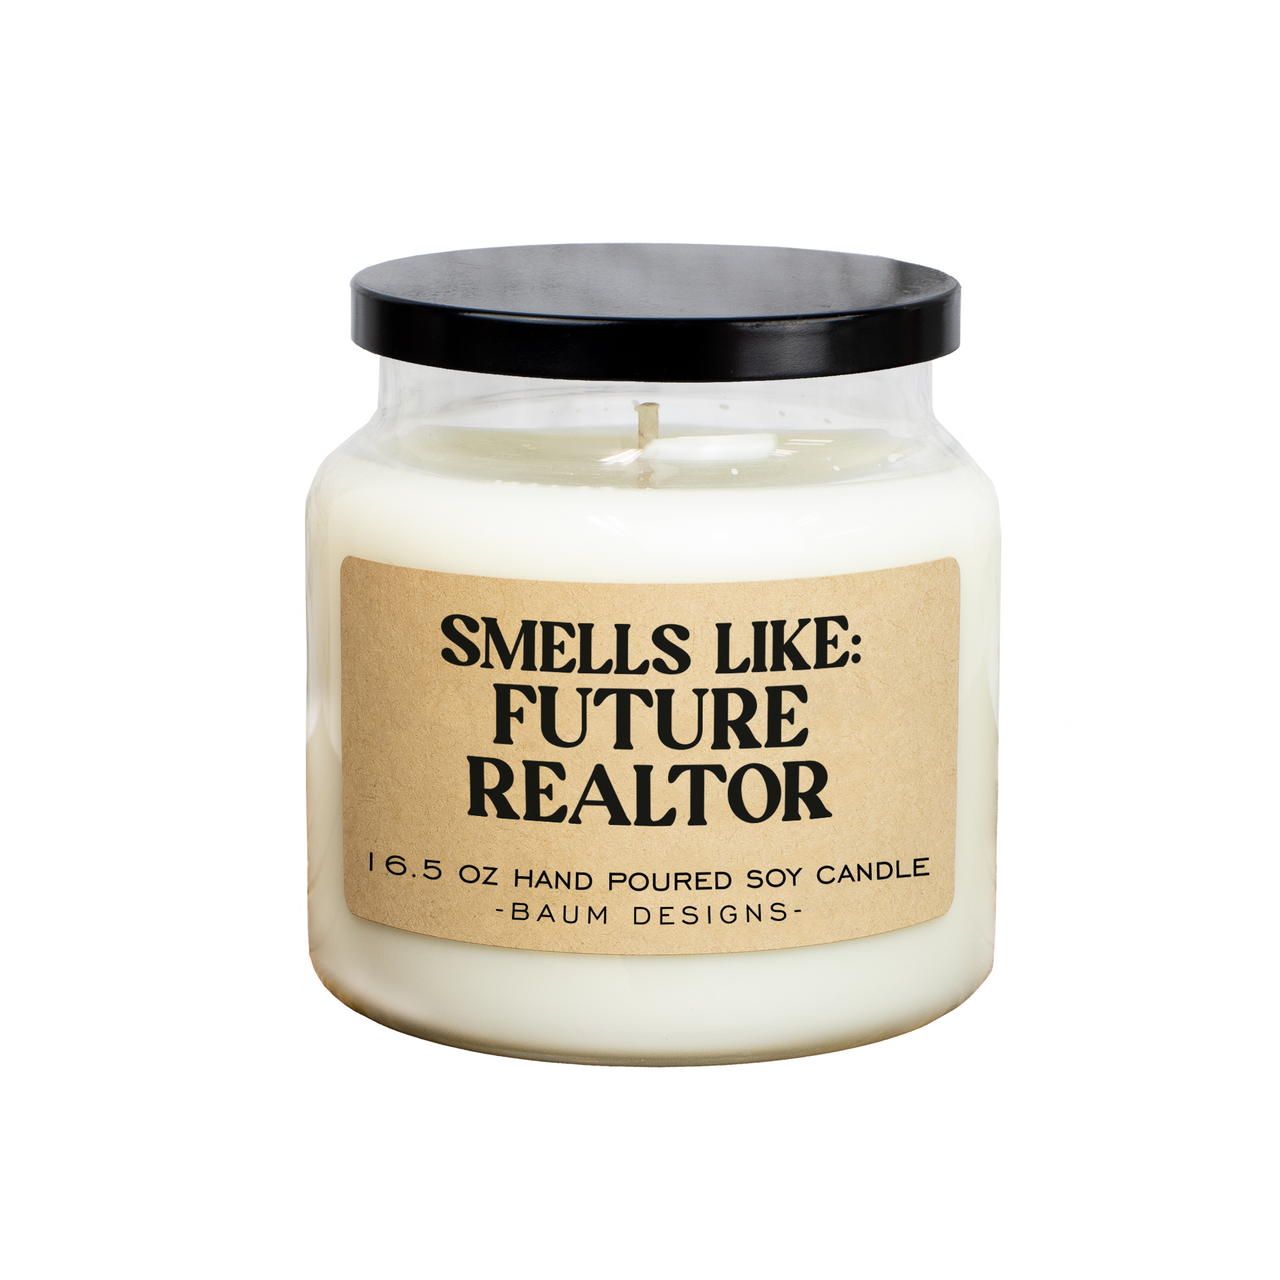 Smells Like Future Realtor Soy Candle